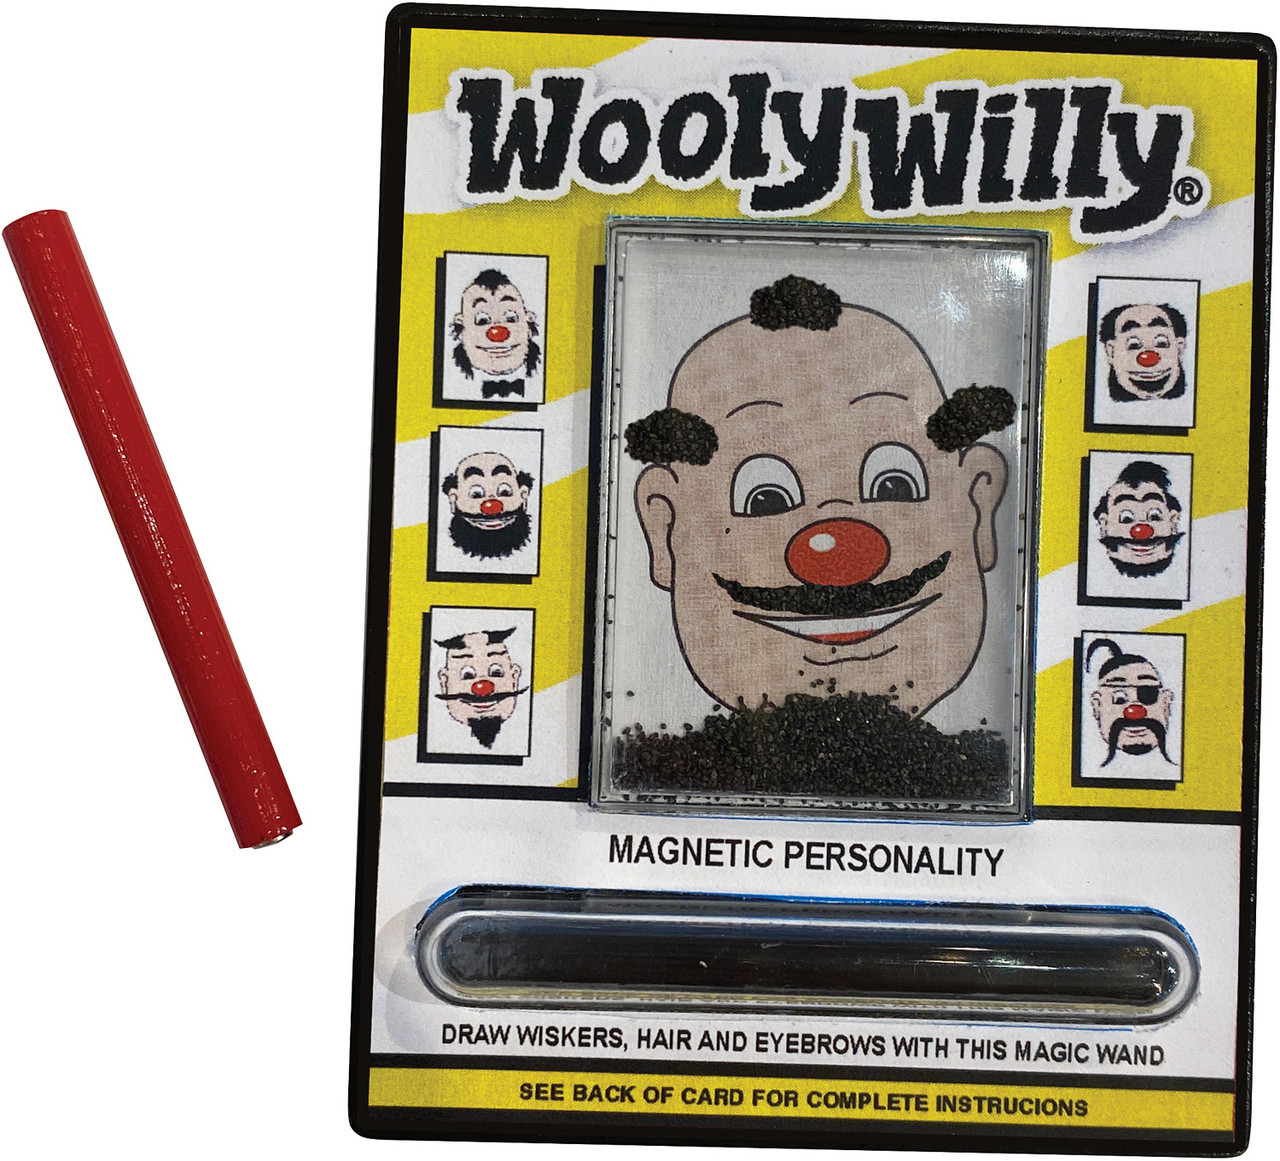 World's Smallest Wooly Willy 3